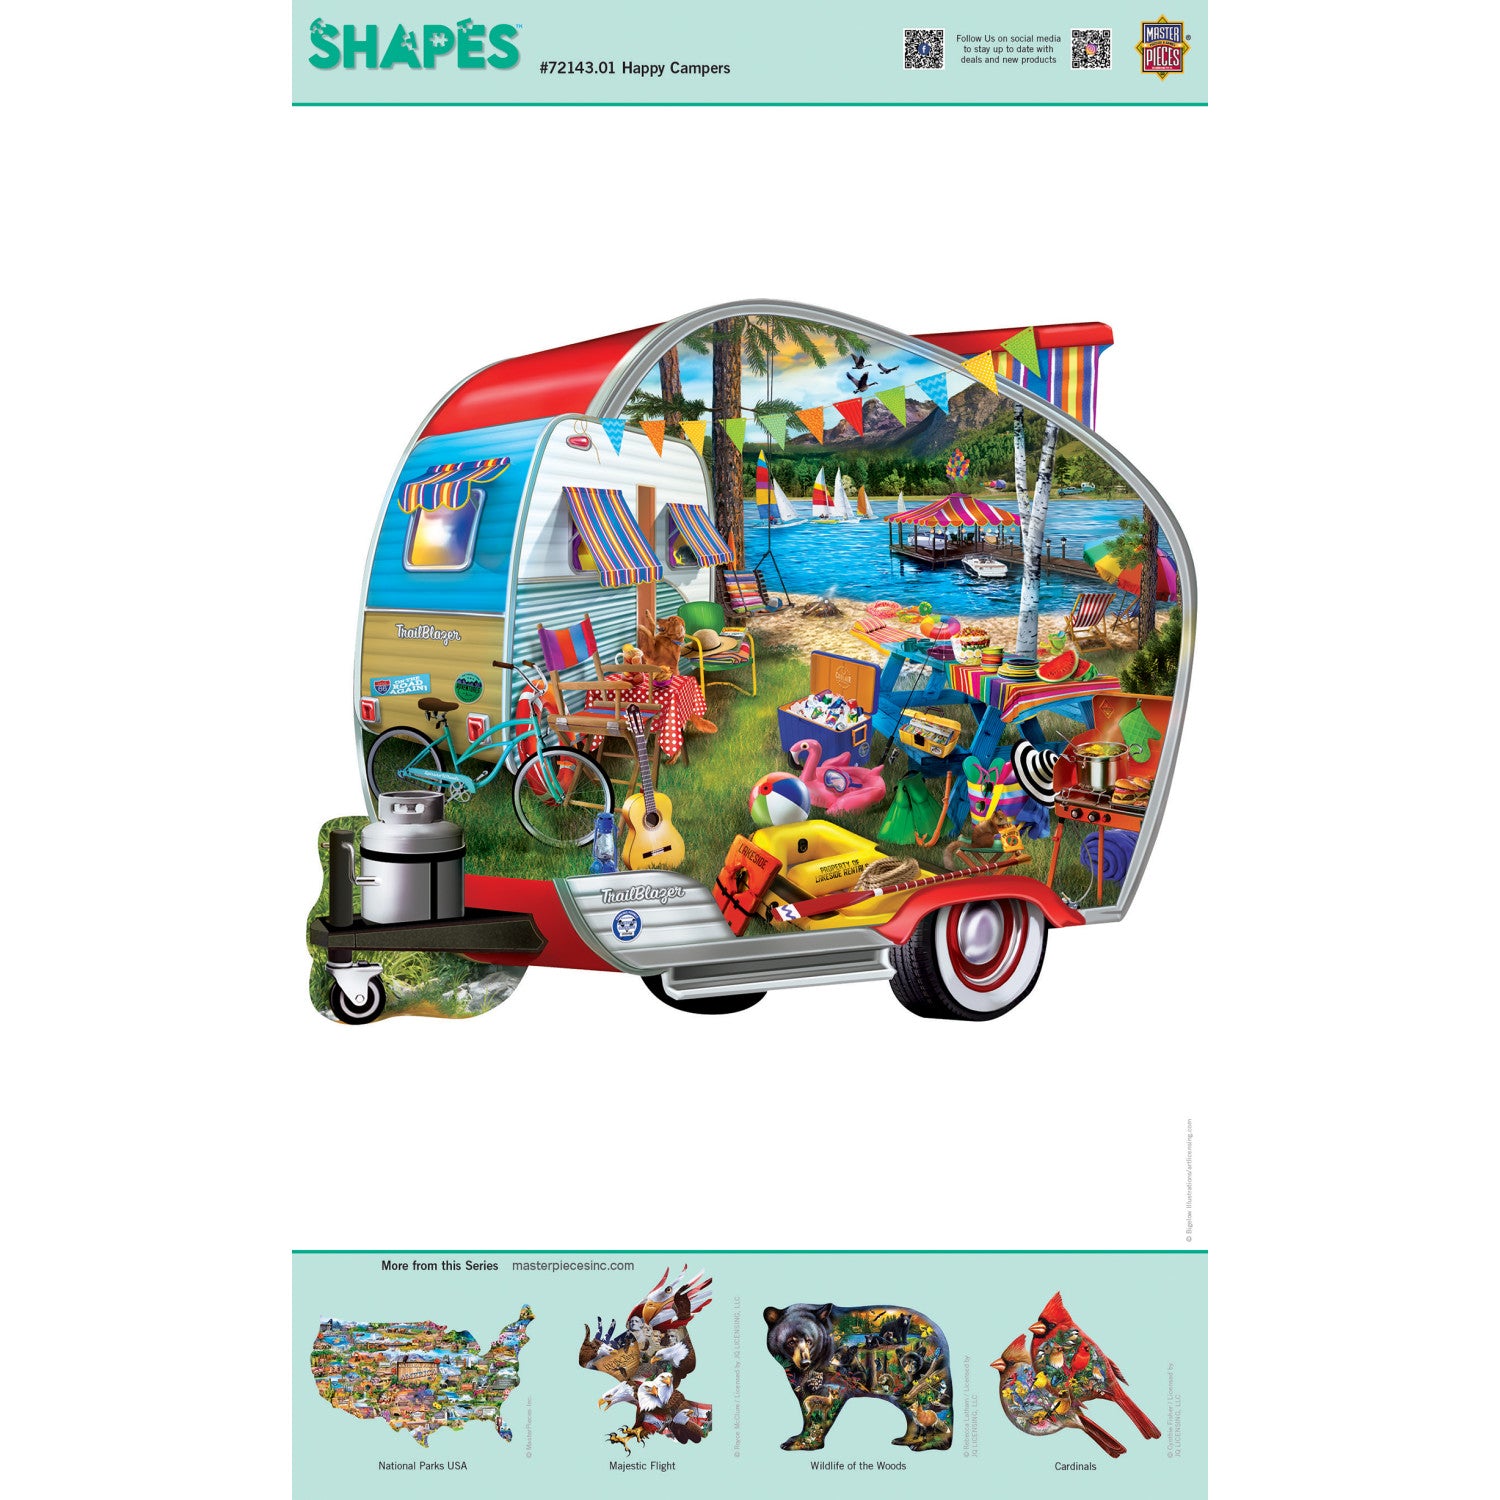 Contours - Happy Campers 1000 Piece Shaped Jigsaw Puzzle